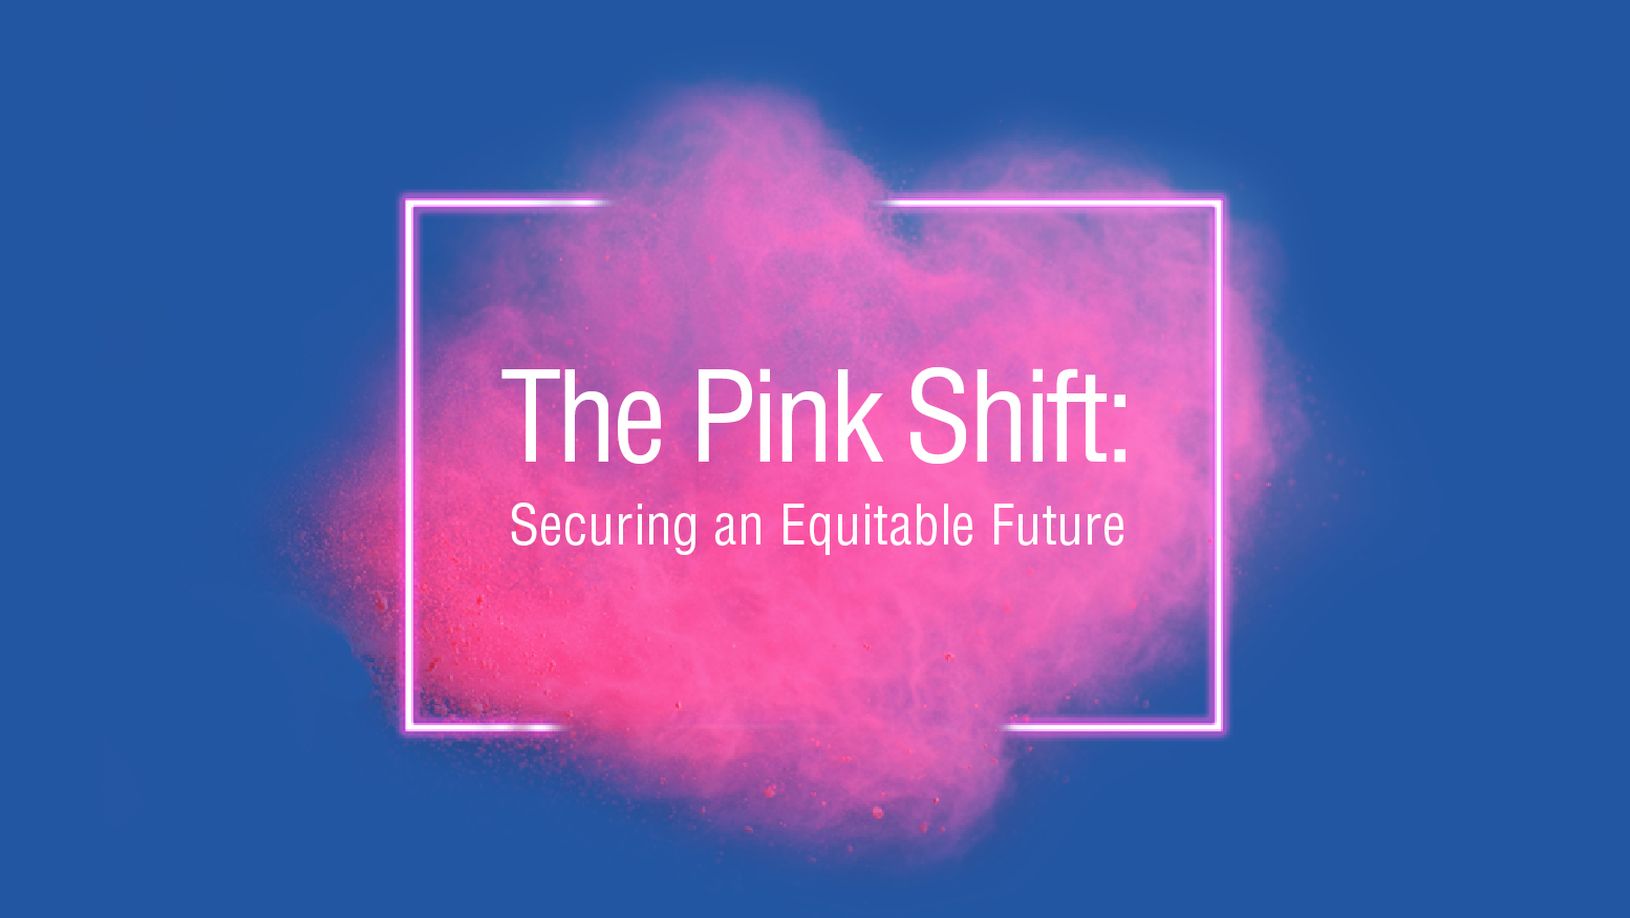 The Pink Shift: Securing an Equitable Future